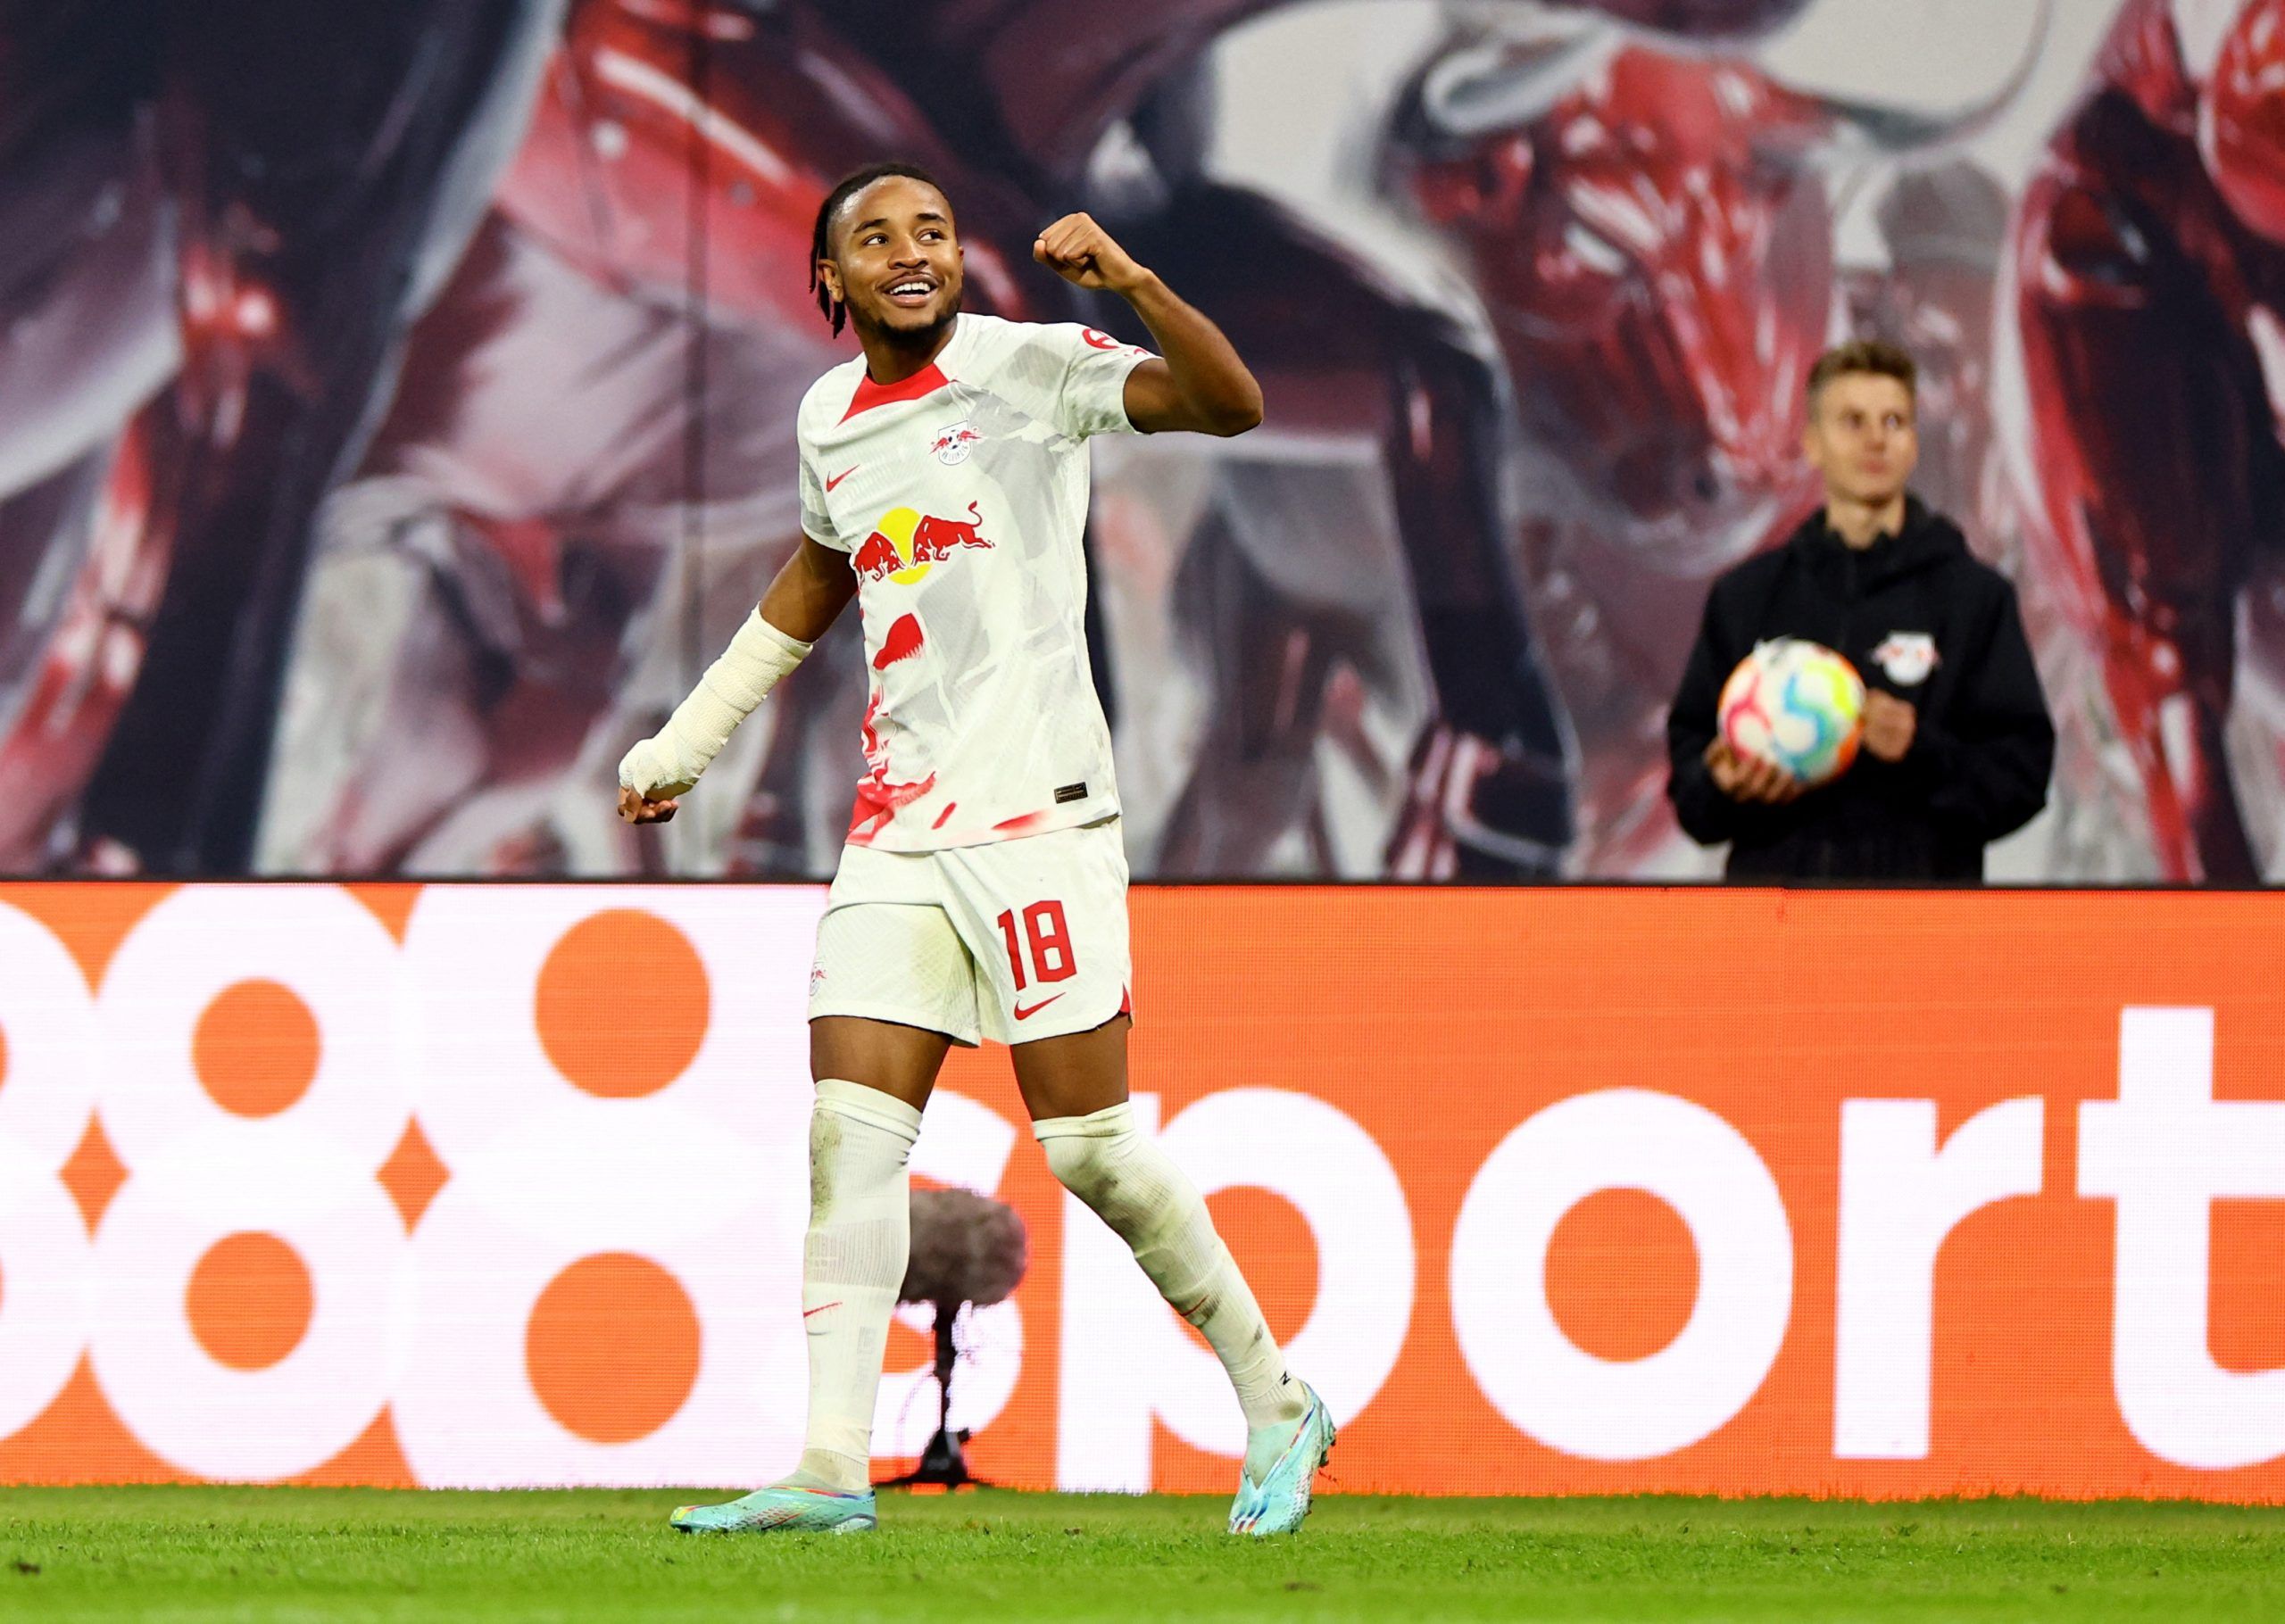 Soccer Football - Bundesliga - RB Leipzig v Freiburg - Red Bull Arena, Leipzig, Germany - November 9, 2022 RB Leipzig's Christopher Nkunku celebrates scoring their second goal REUTERS/Lisi Niesner DFL REGULATIONS PROHIBIT ANY USE OF PHOTOGRAPHS AS IMAGE SEQUENCES AND/OR QUASI-VIDEO.